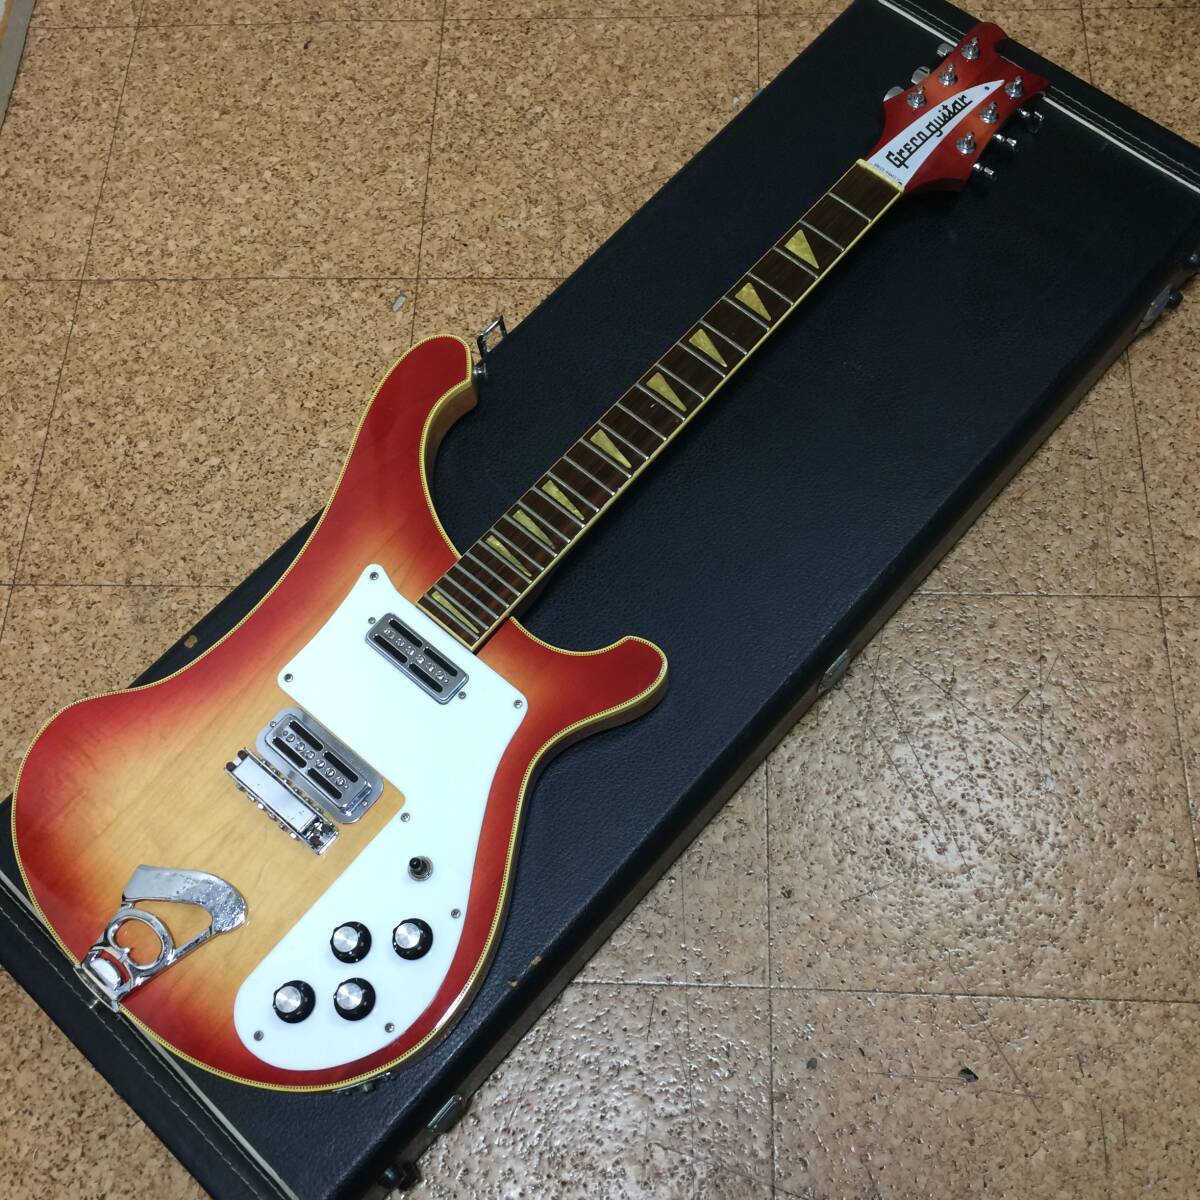 Greco guitar GRECO MAKES IT グレコ メイクス イット エレキギター エレキ 昭和 MADE IN JAPAN 日本製 VINTAGE ヴィンテージ _画像1